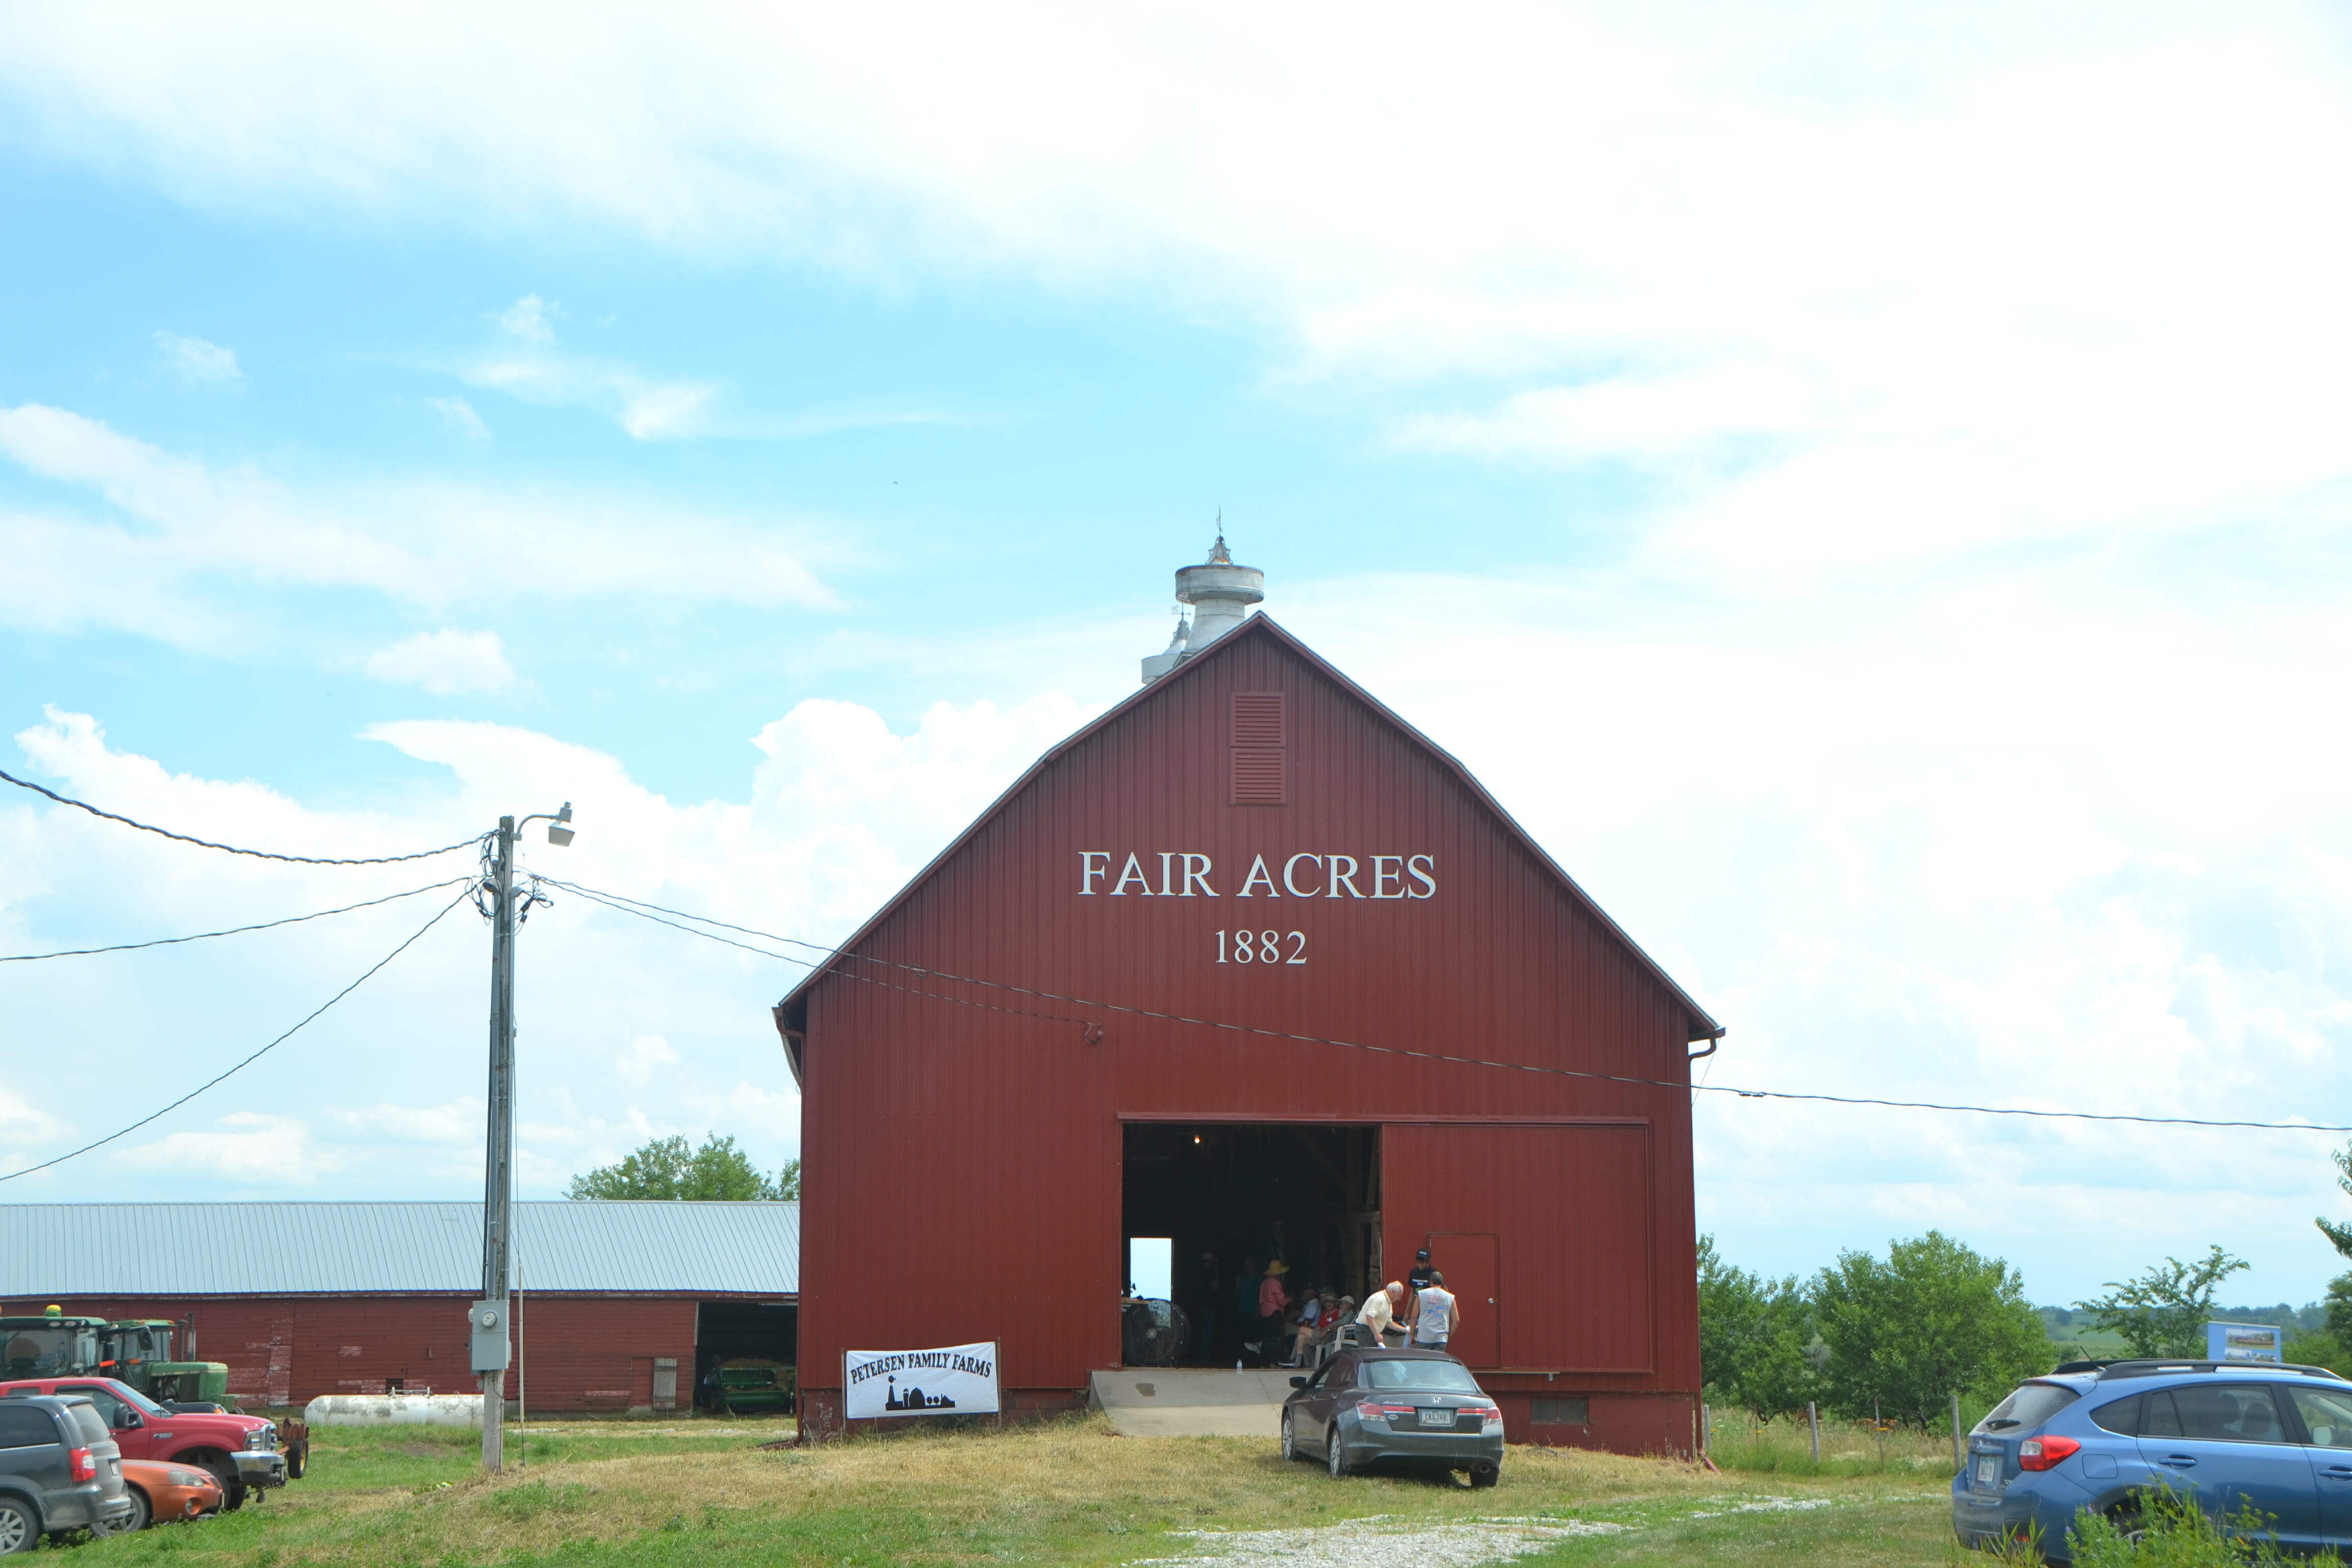 Fair Acres is the name of the Shivvers farm the Petersens now farm.